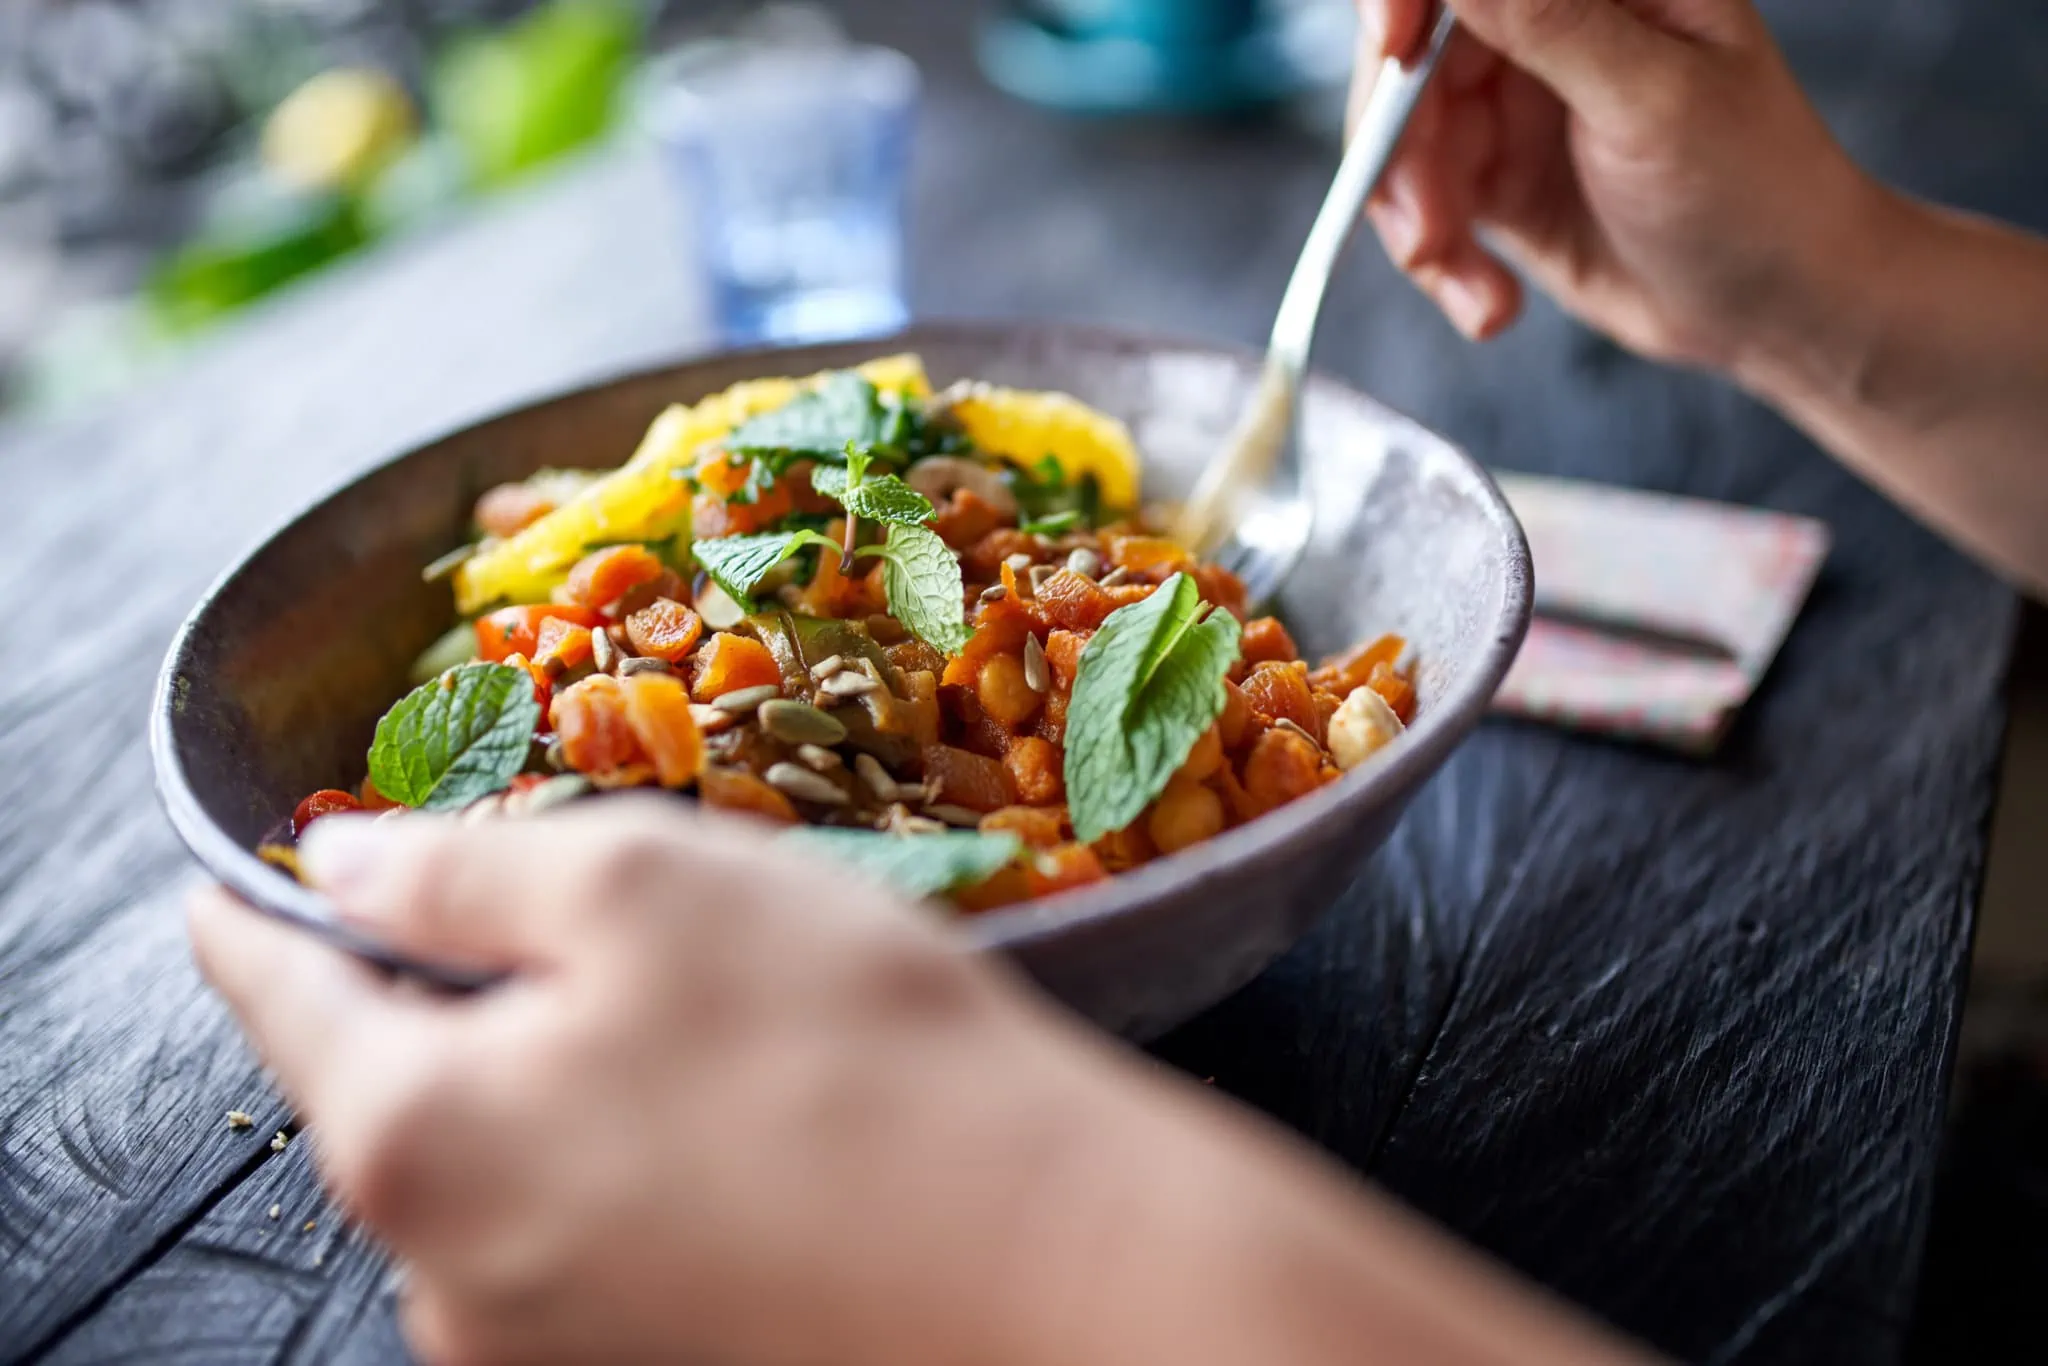 Closeup shot of hands holding a bowl with chickpeas, fresh herbs and fruit at wooden table